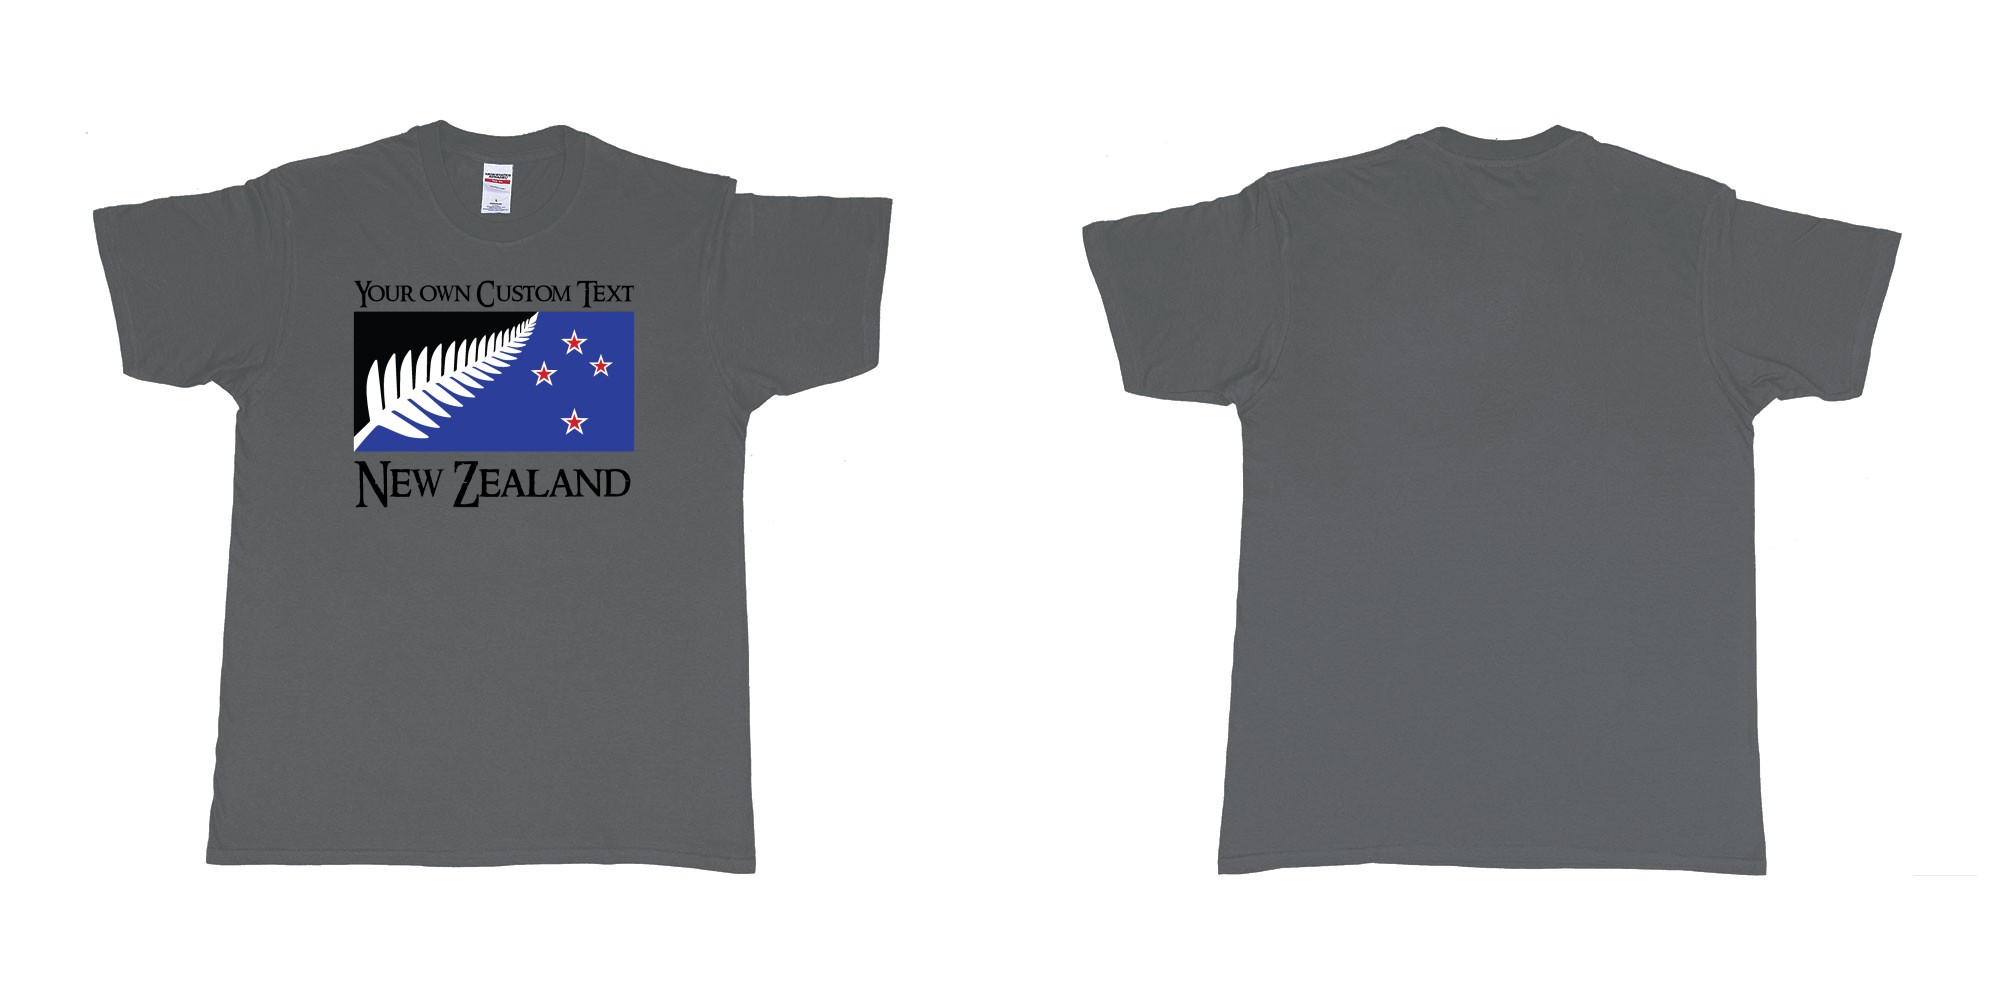 Custom tshirt design new zealand silver fern flag in fabric color charcoal choice your own text made in Bali by The Pirate Way